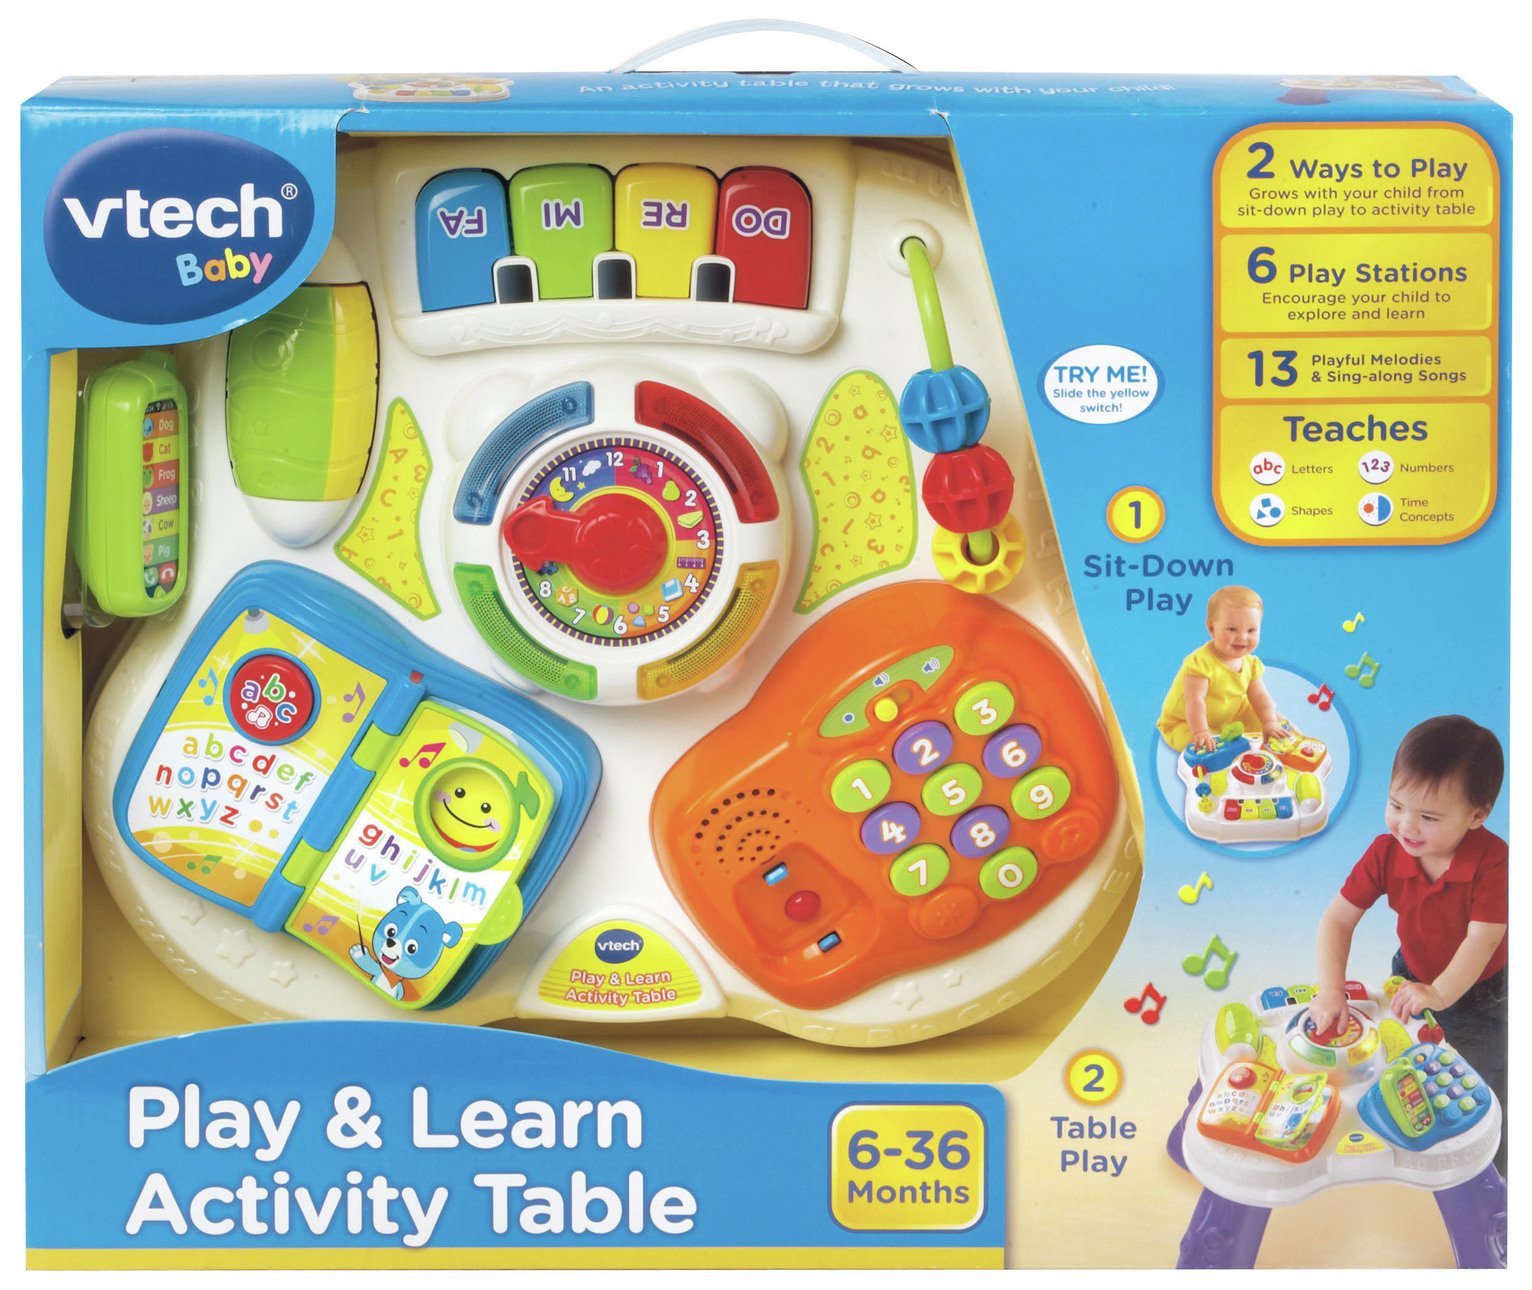 VTech Play and Learn Activity Table Review